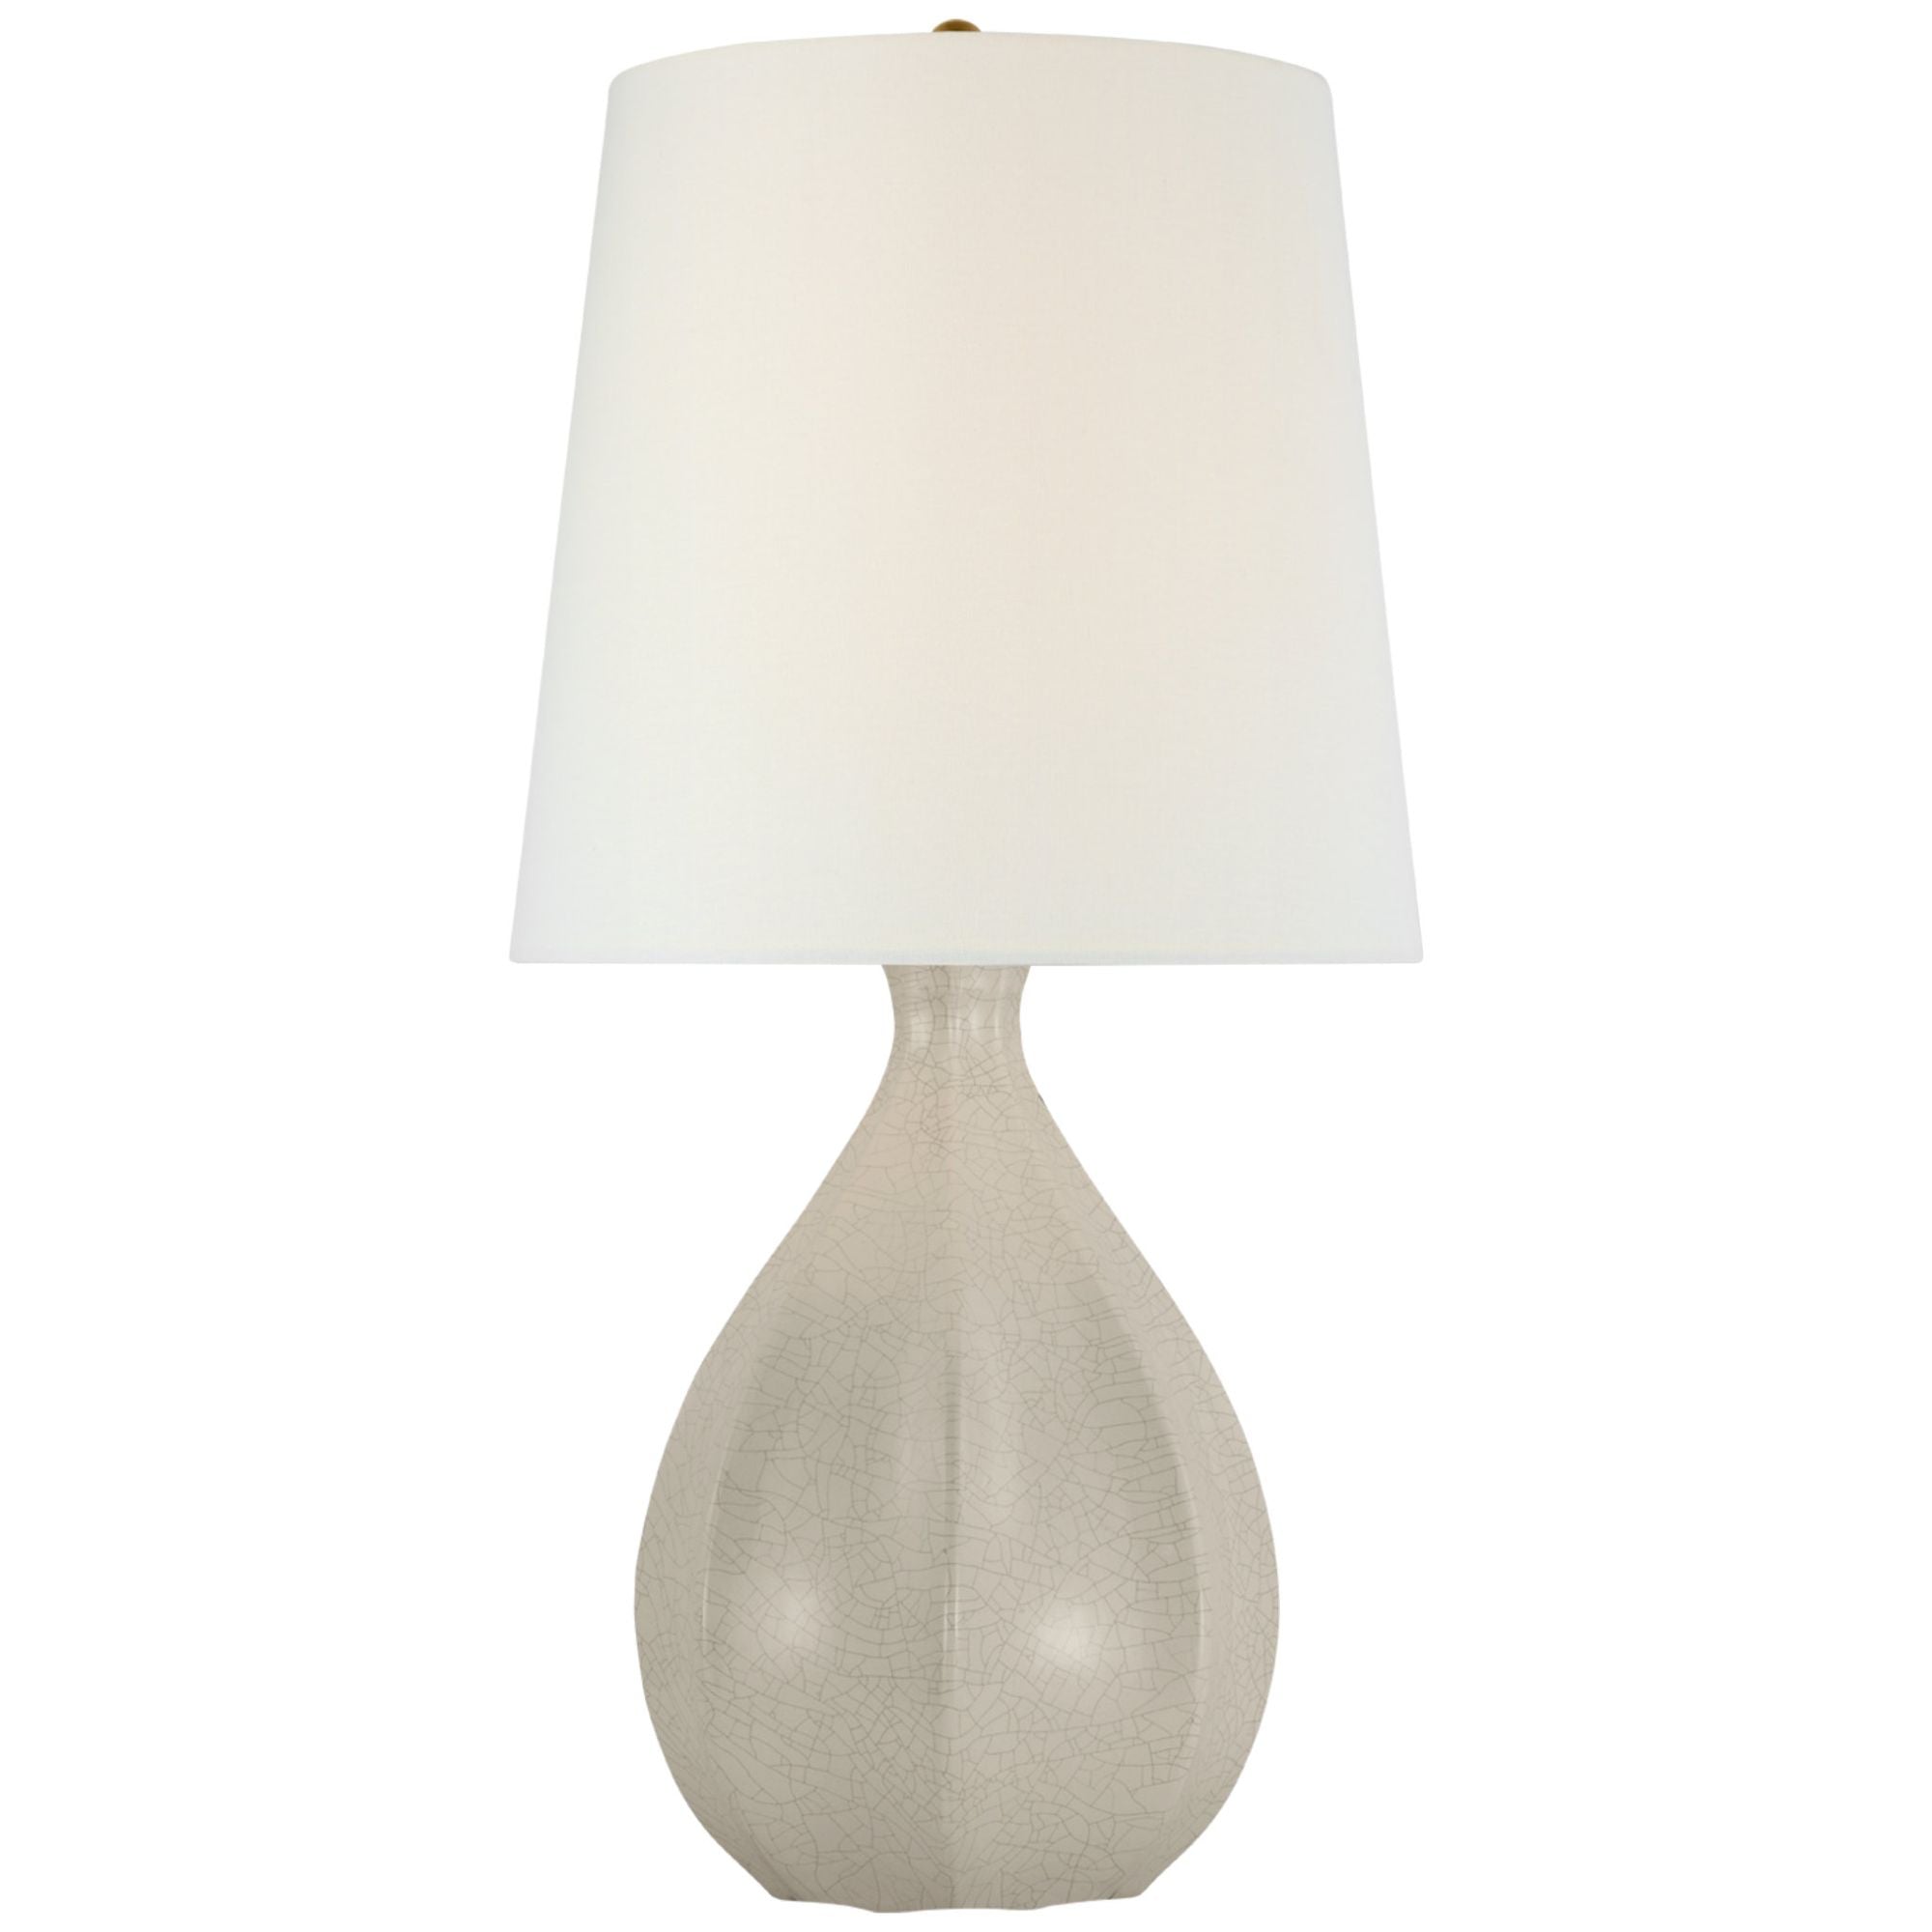 AERIN Rana Large Table Lamp in Bone Craquelure with Linen Shade